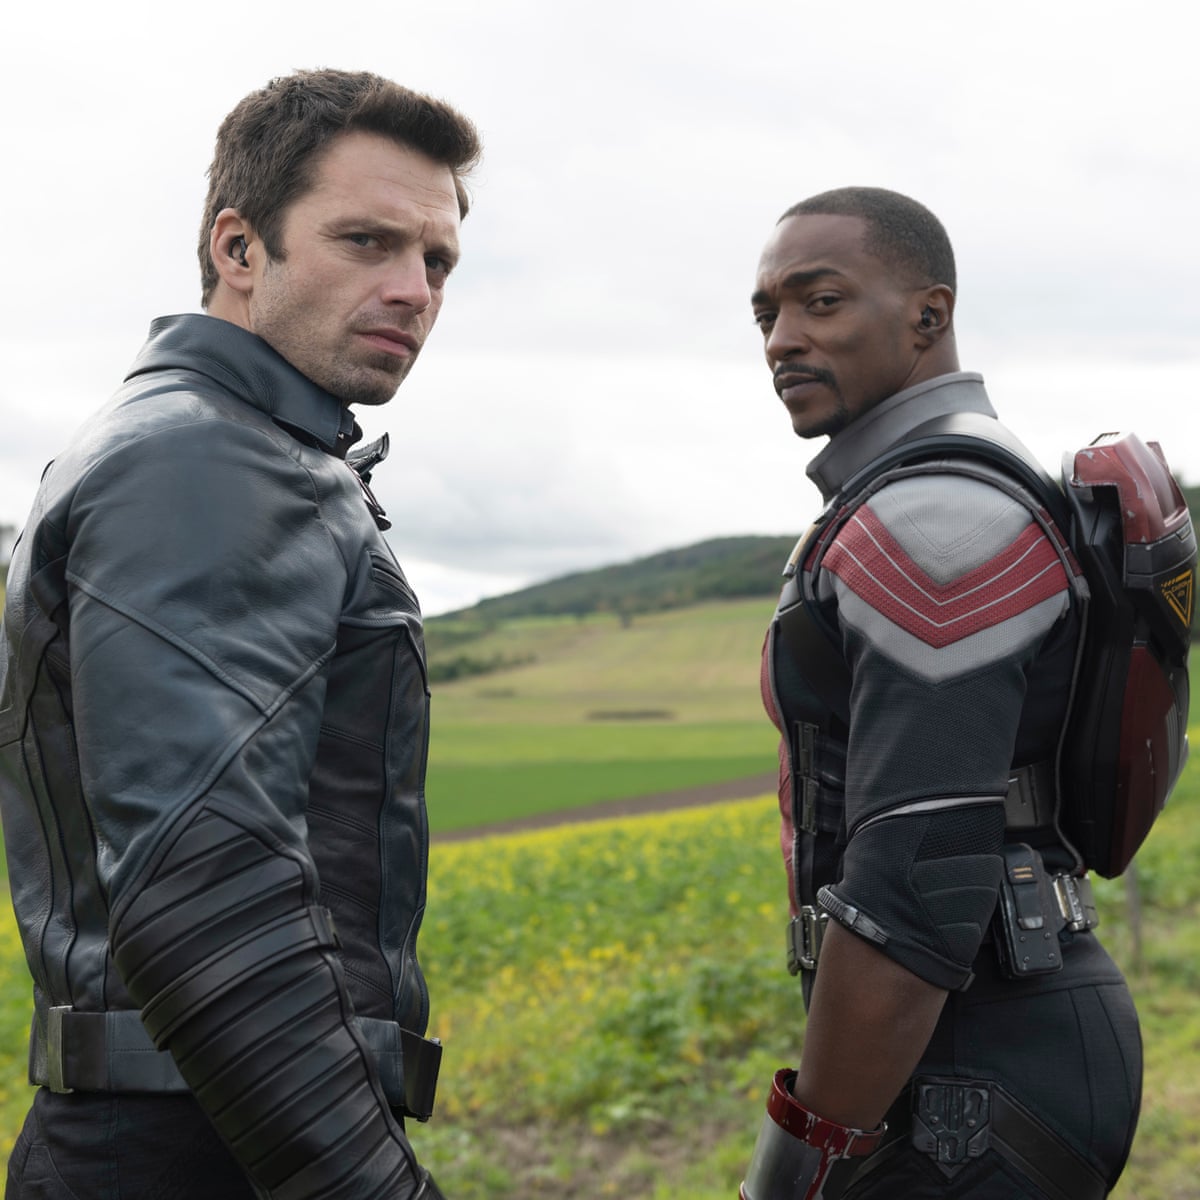 The falcon and the winter soldier